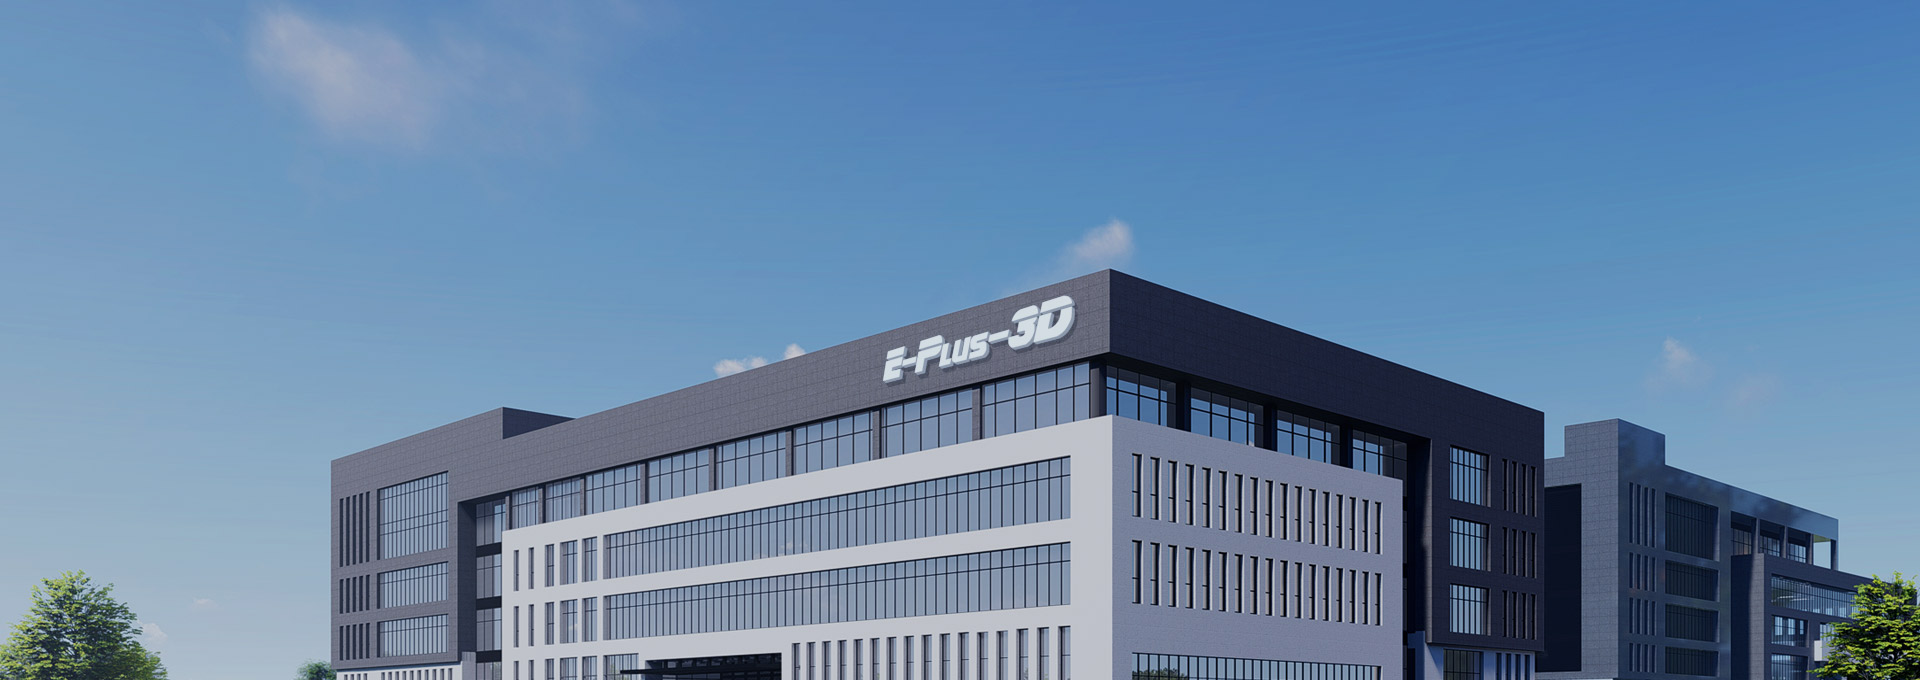 Eplus3D Developing History